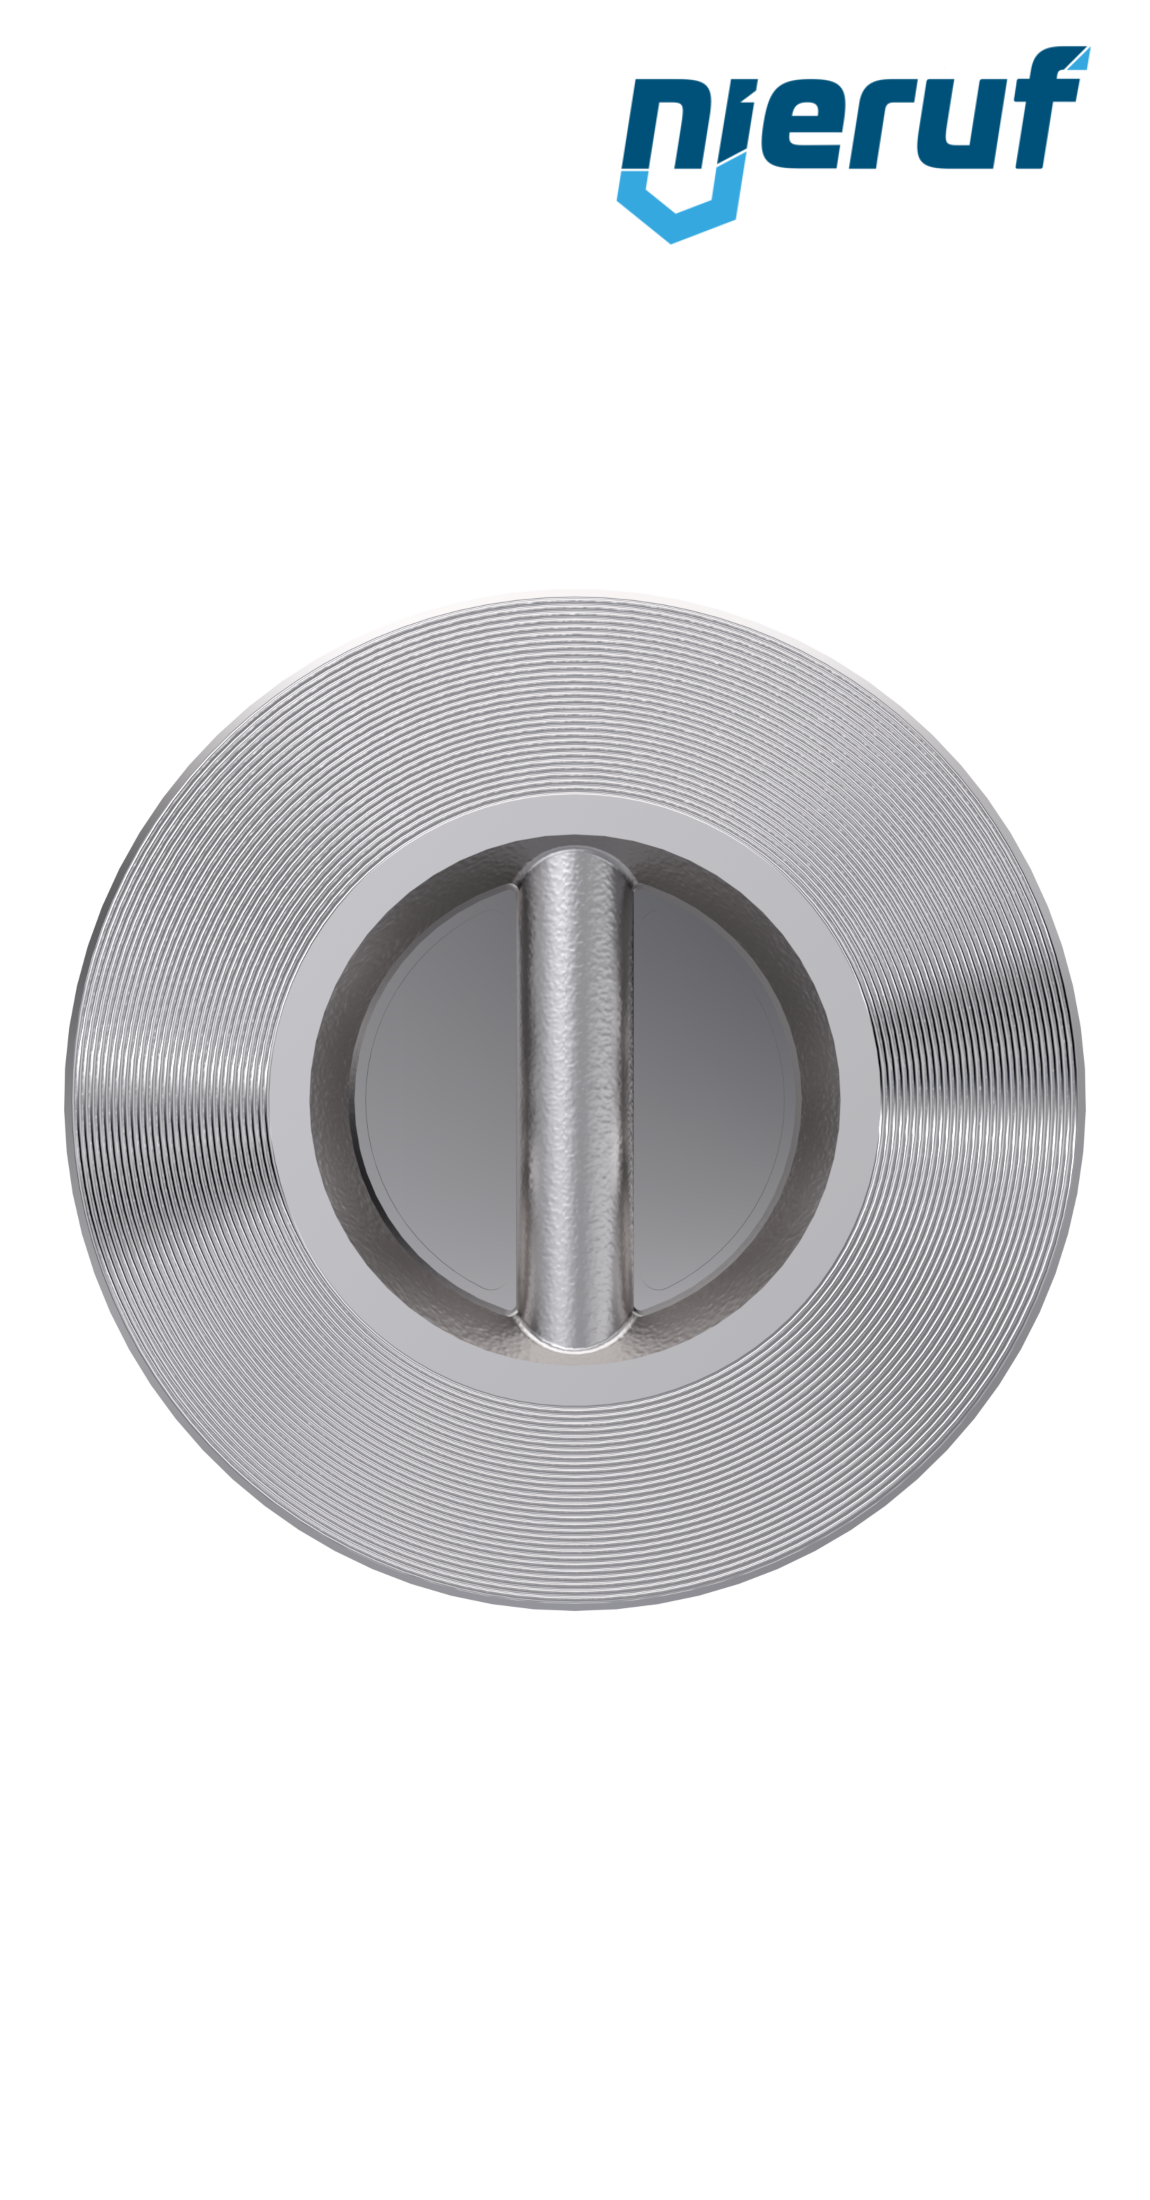 dual plate check valve DN200 DR03 ANSI 150 stainless steel 1.4408 metal